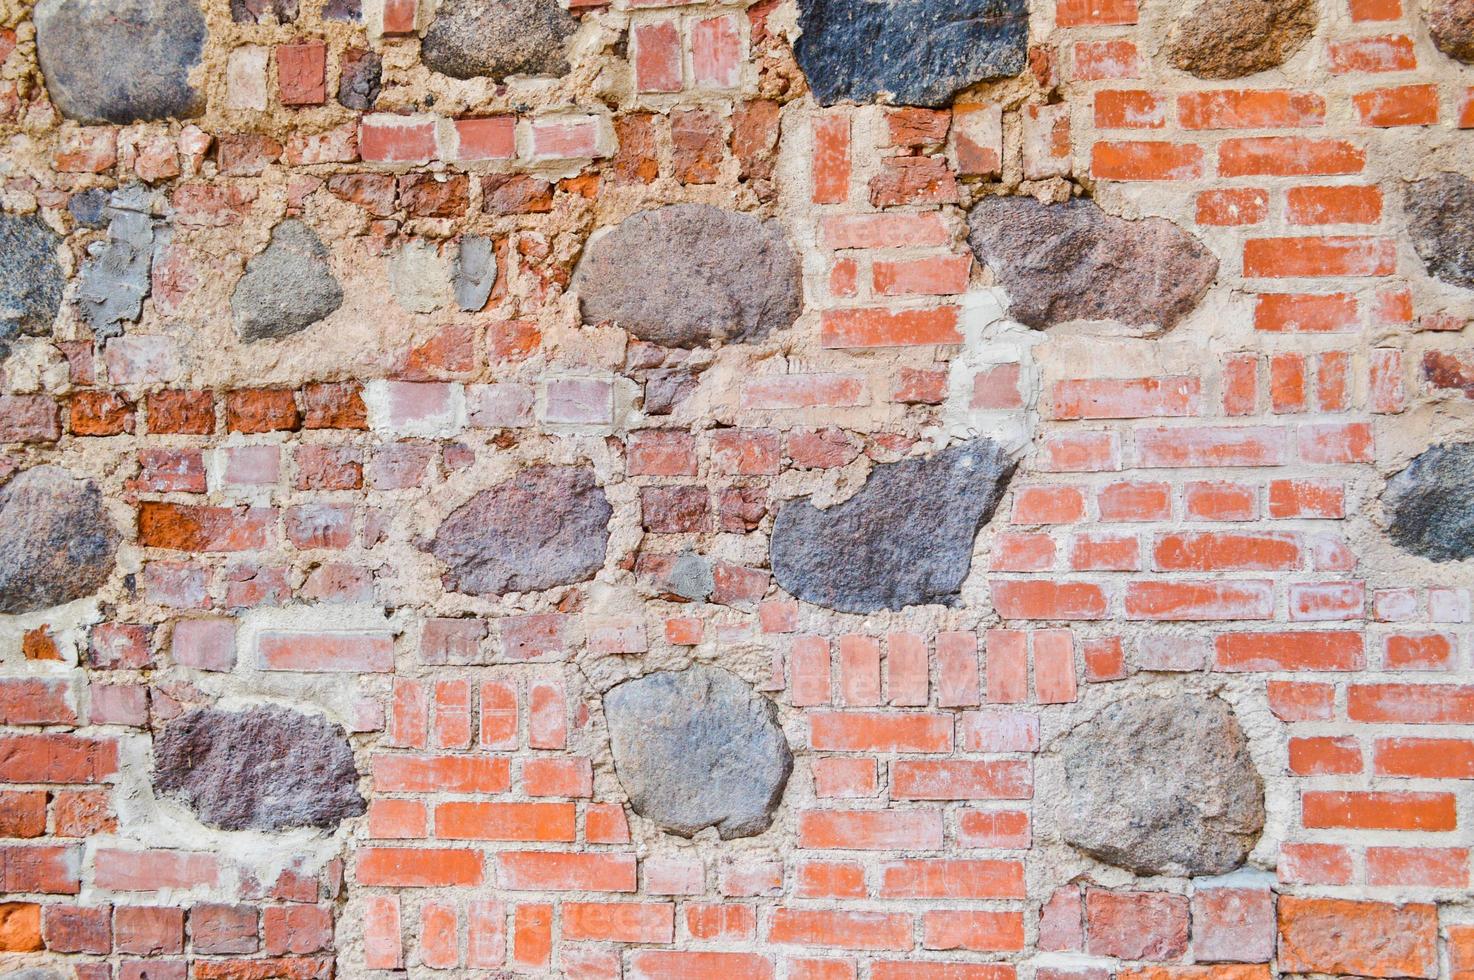 The texture of the old ancient medieval antique stone hard peeling cracked brick wall of rectangular red clay bricks and large stones, cobblestones. The background photo